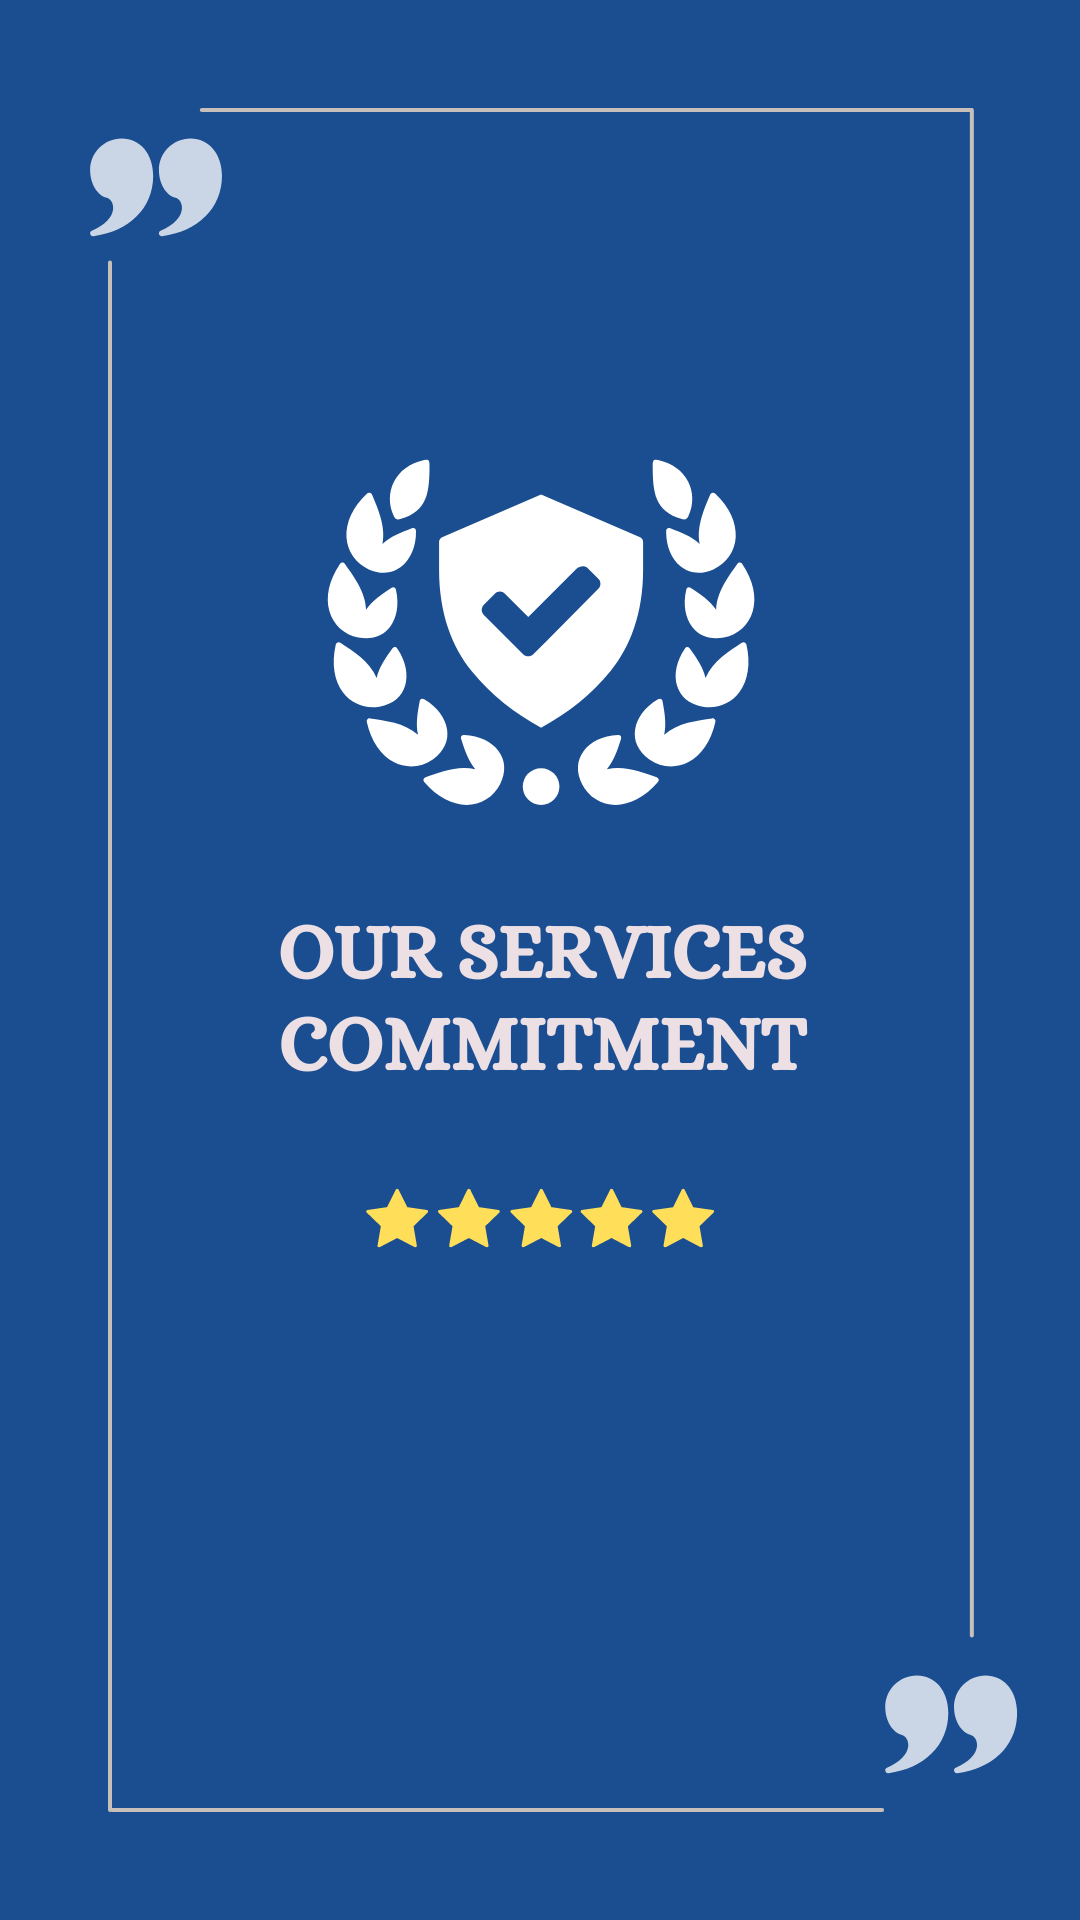 OUR SERVICES COMMITMENT